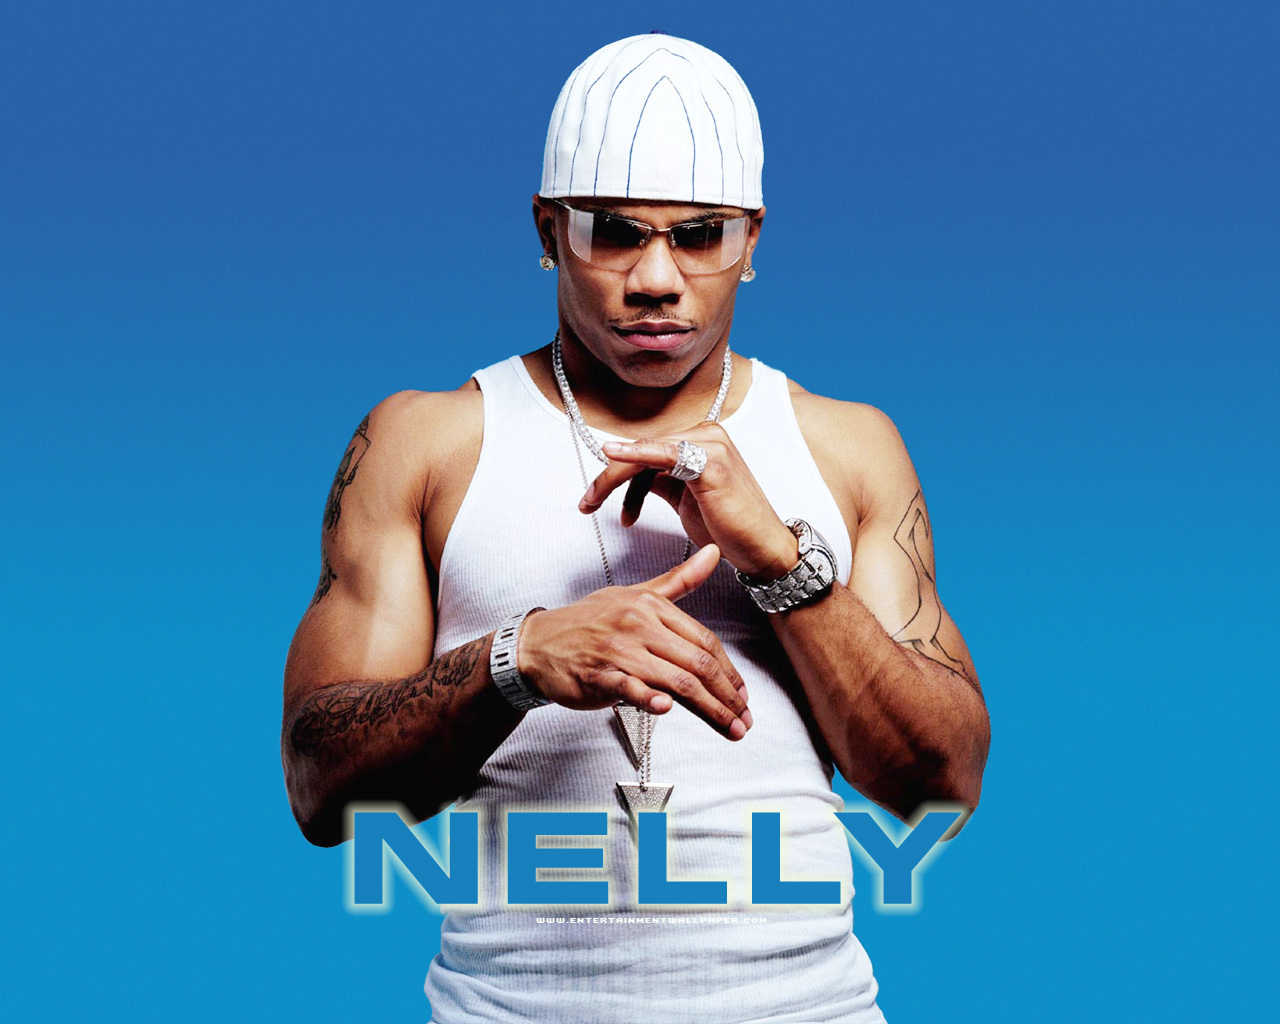 Nelly Image HD Wallpaper And Background Photos